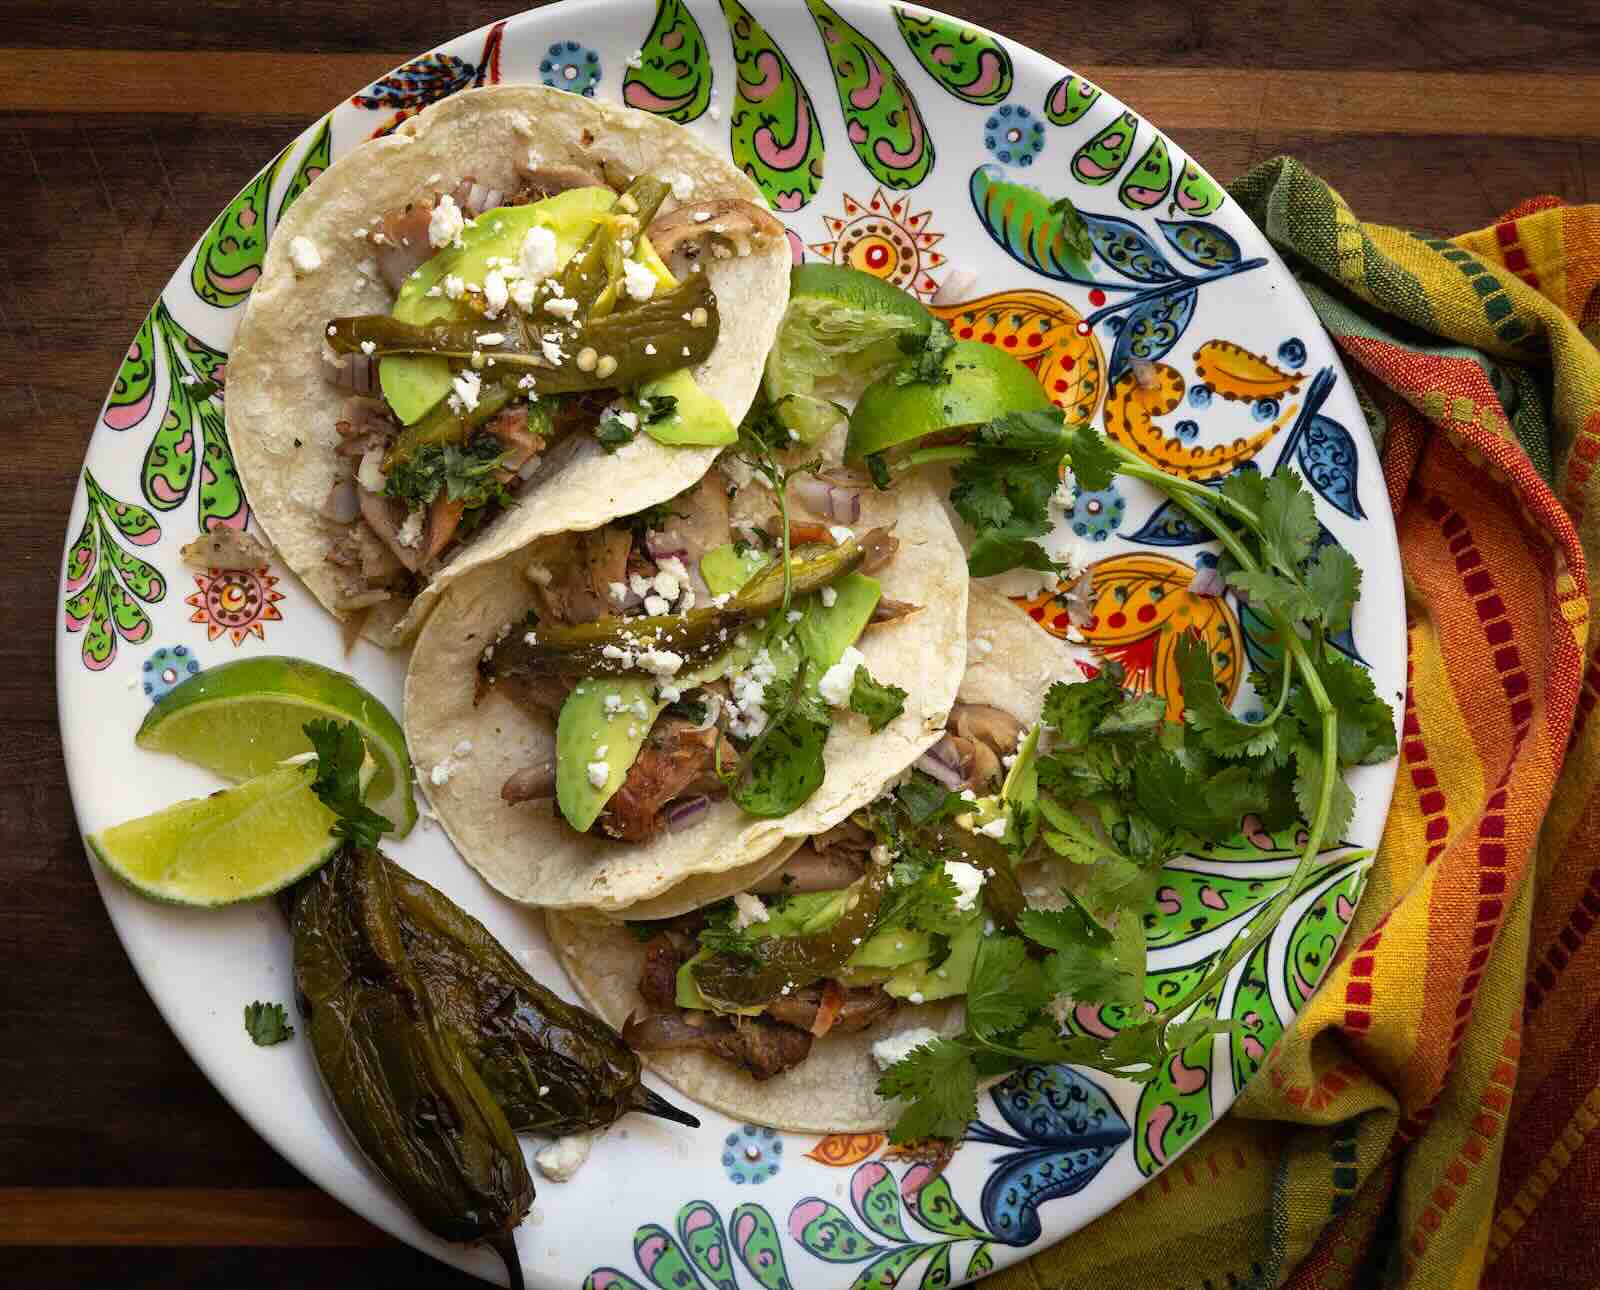 Prepared tacos using cottontail rabbit meat on a colorful plate